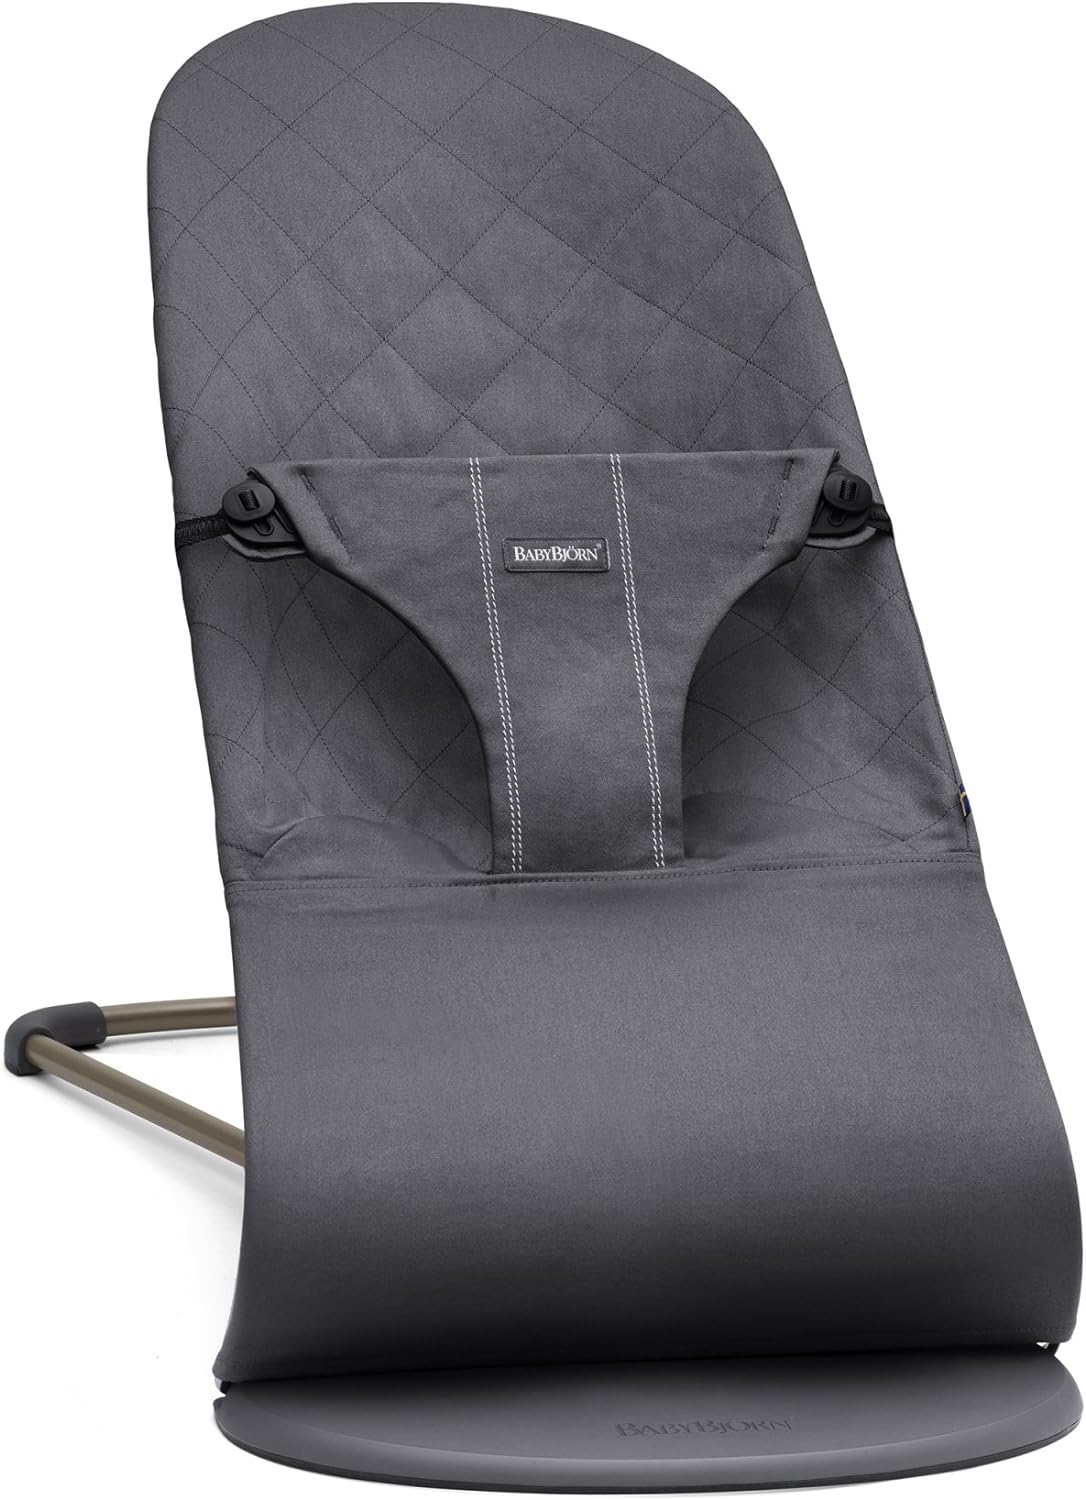 BabyBjorn Bouncer Bliss, Woven, Classic quilt, Anthracite